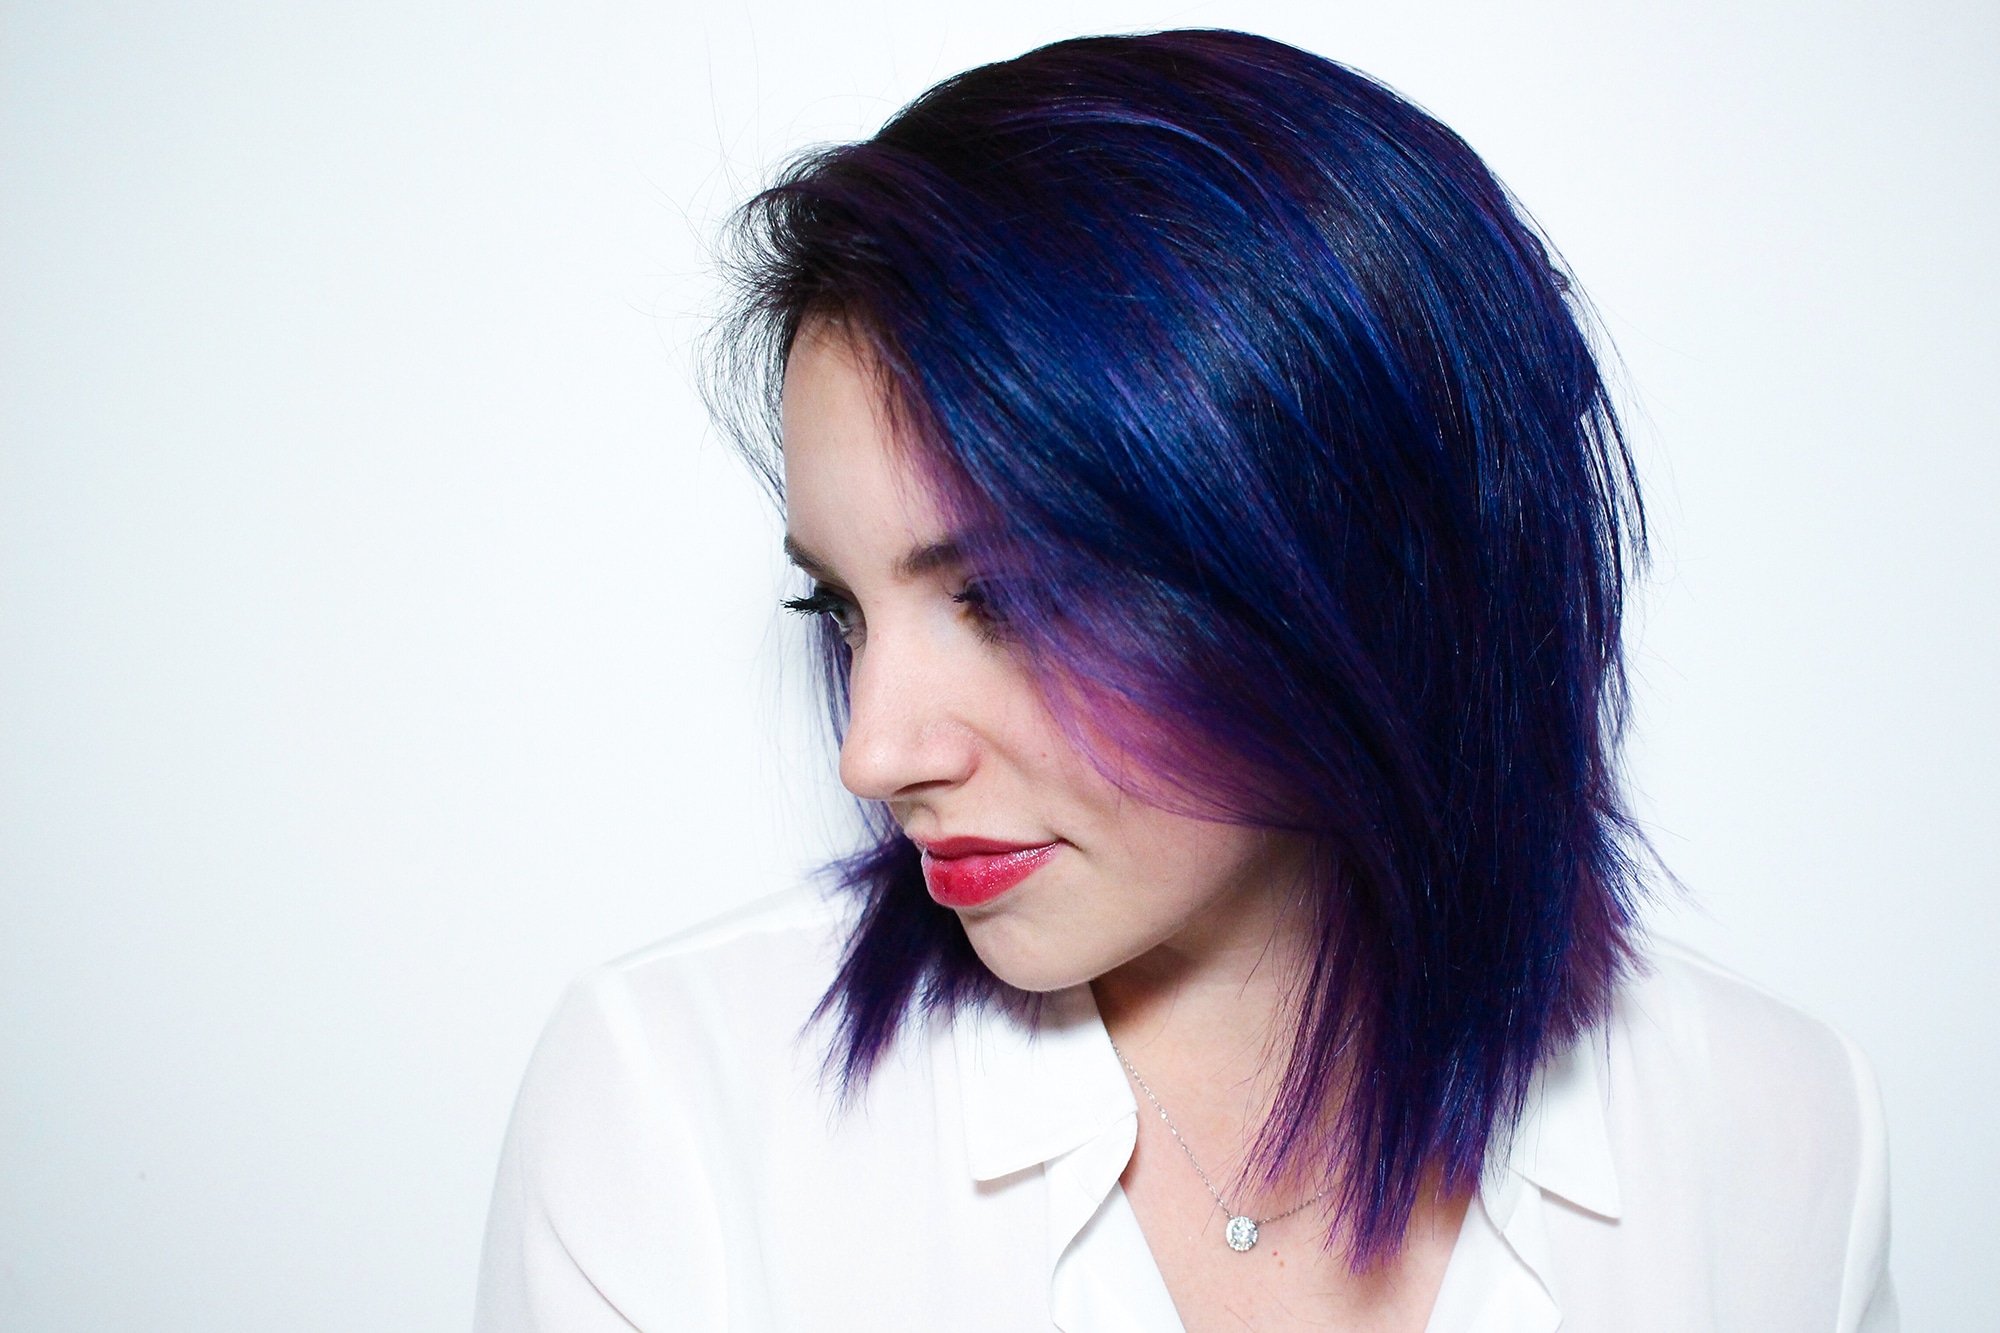 2. How to Dye Dark Hair Blue at Home - wide 5